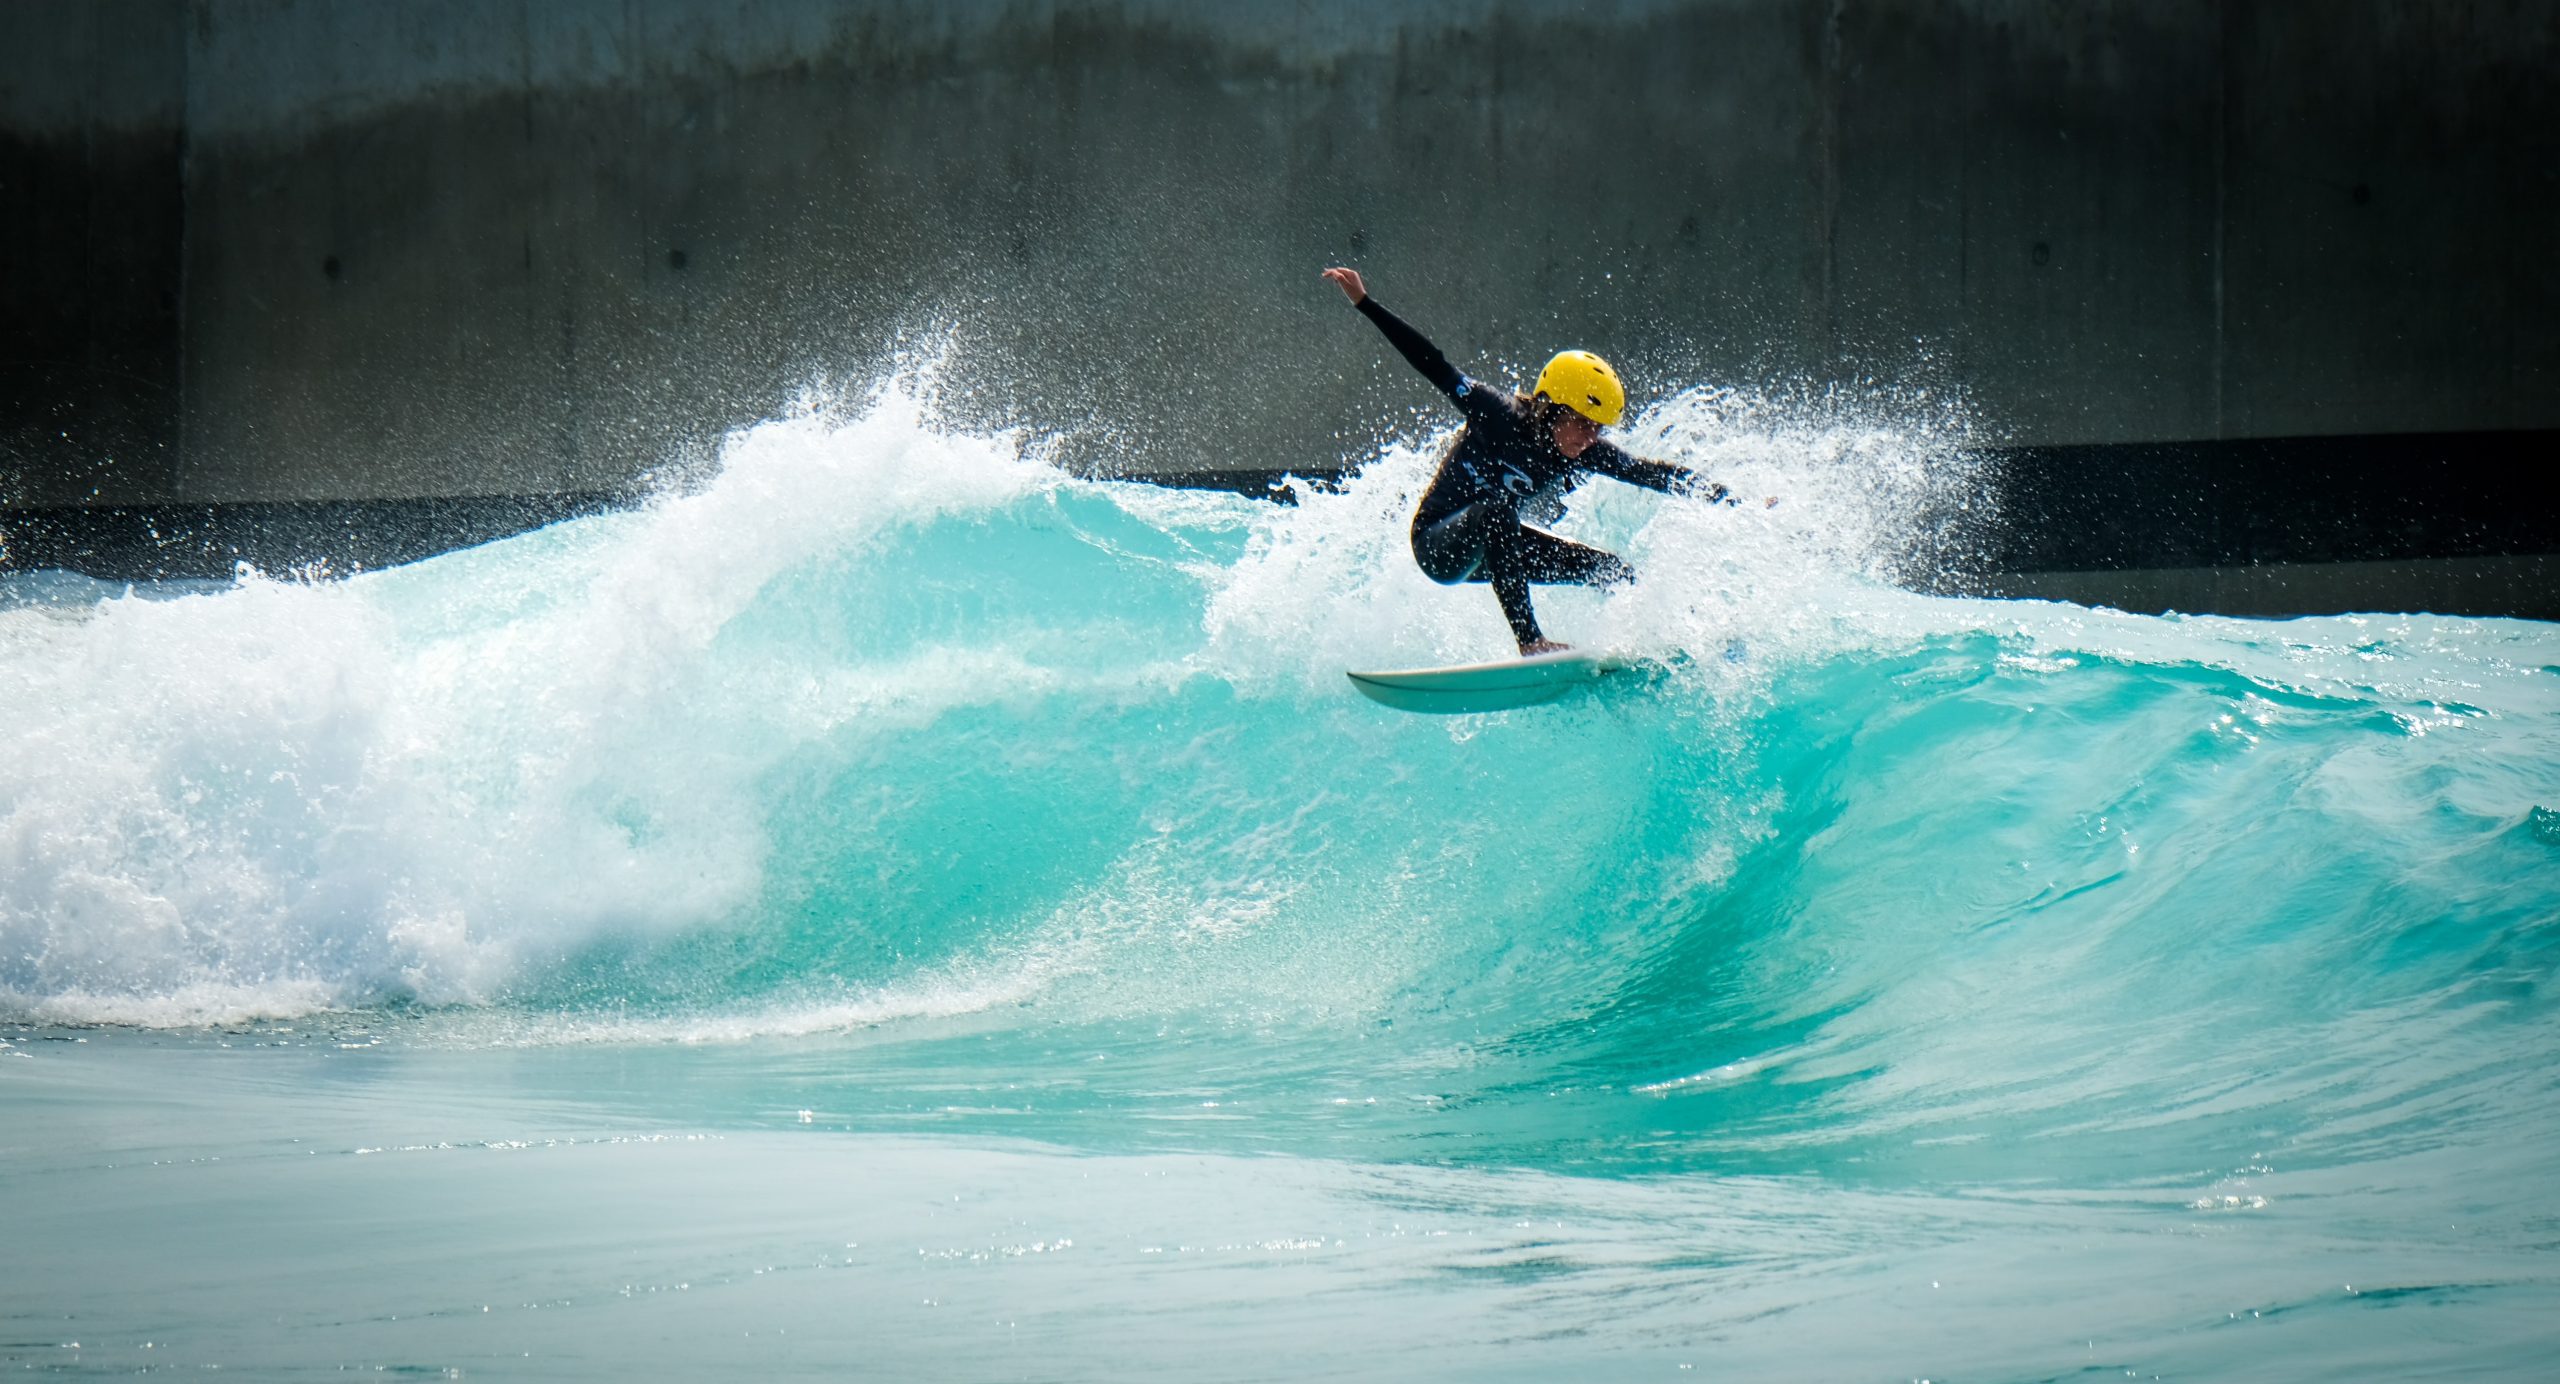 A boy with a yellow helmet surfing a wave at an artificial wave park.